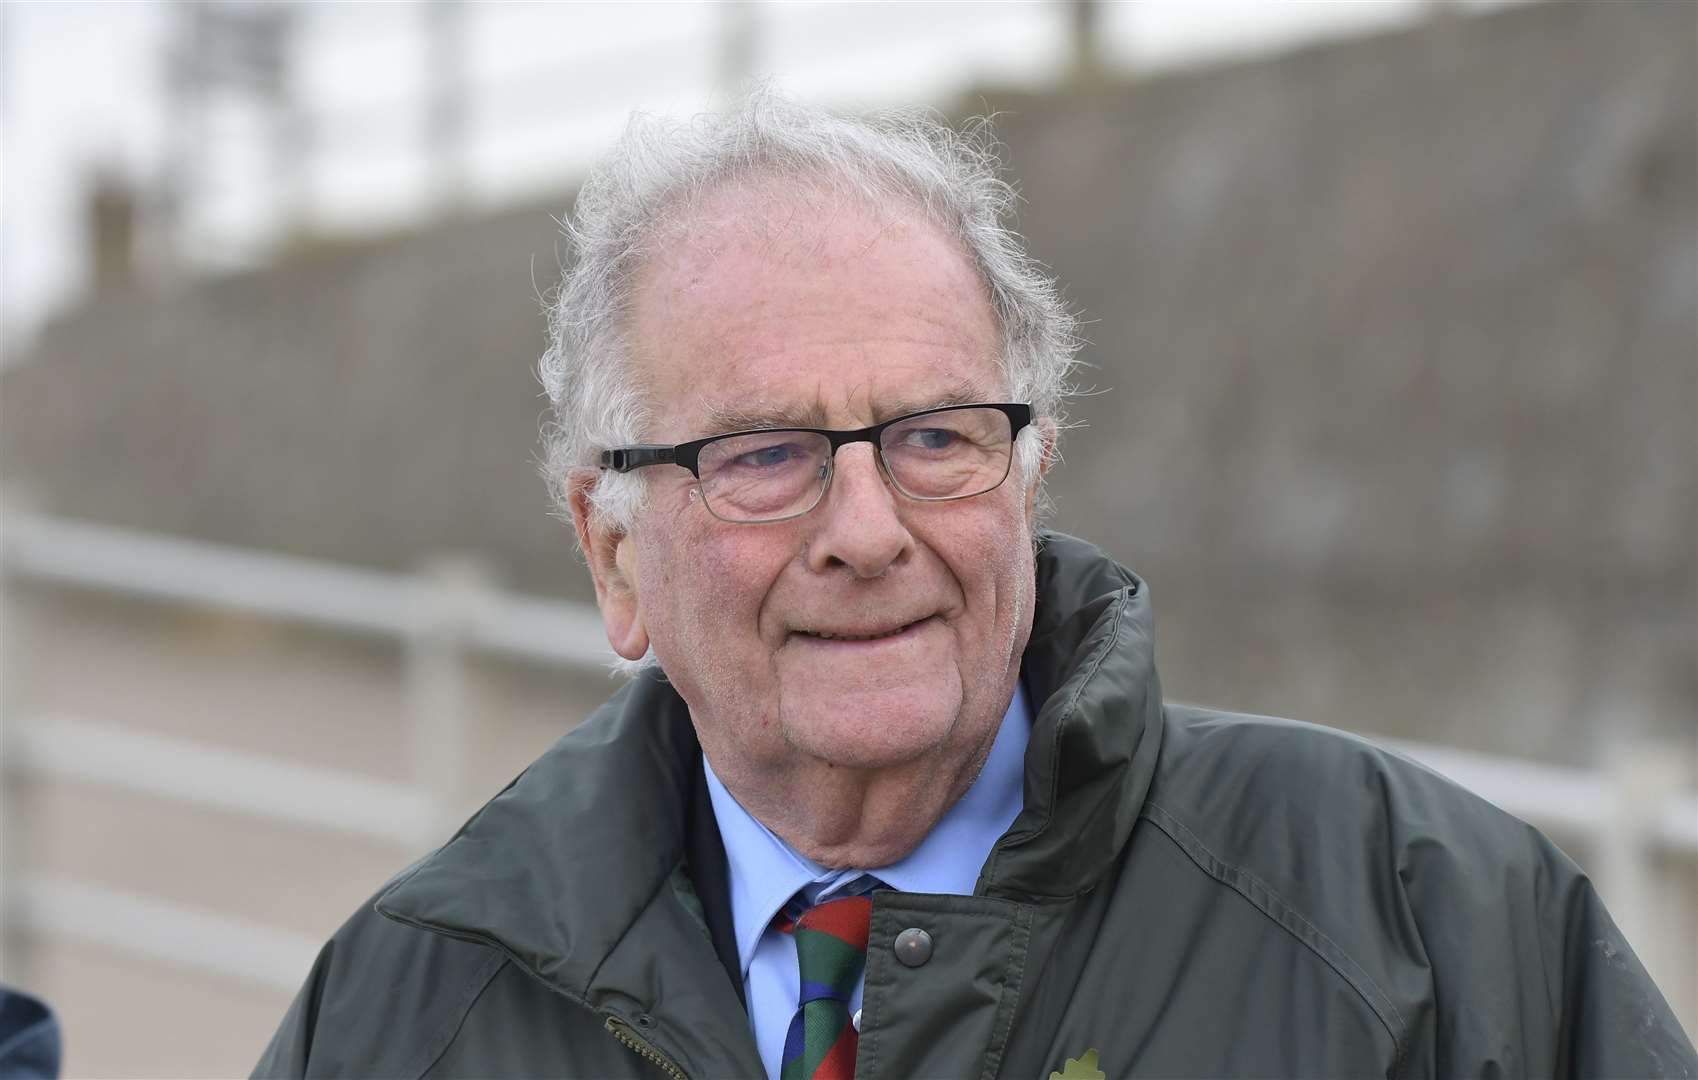 Sir Roger Gale has been a long-standing Conservative MP in Kent